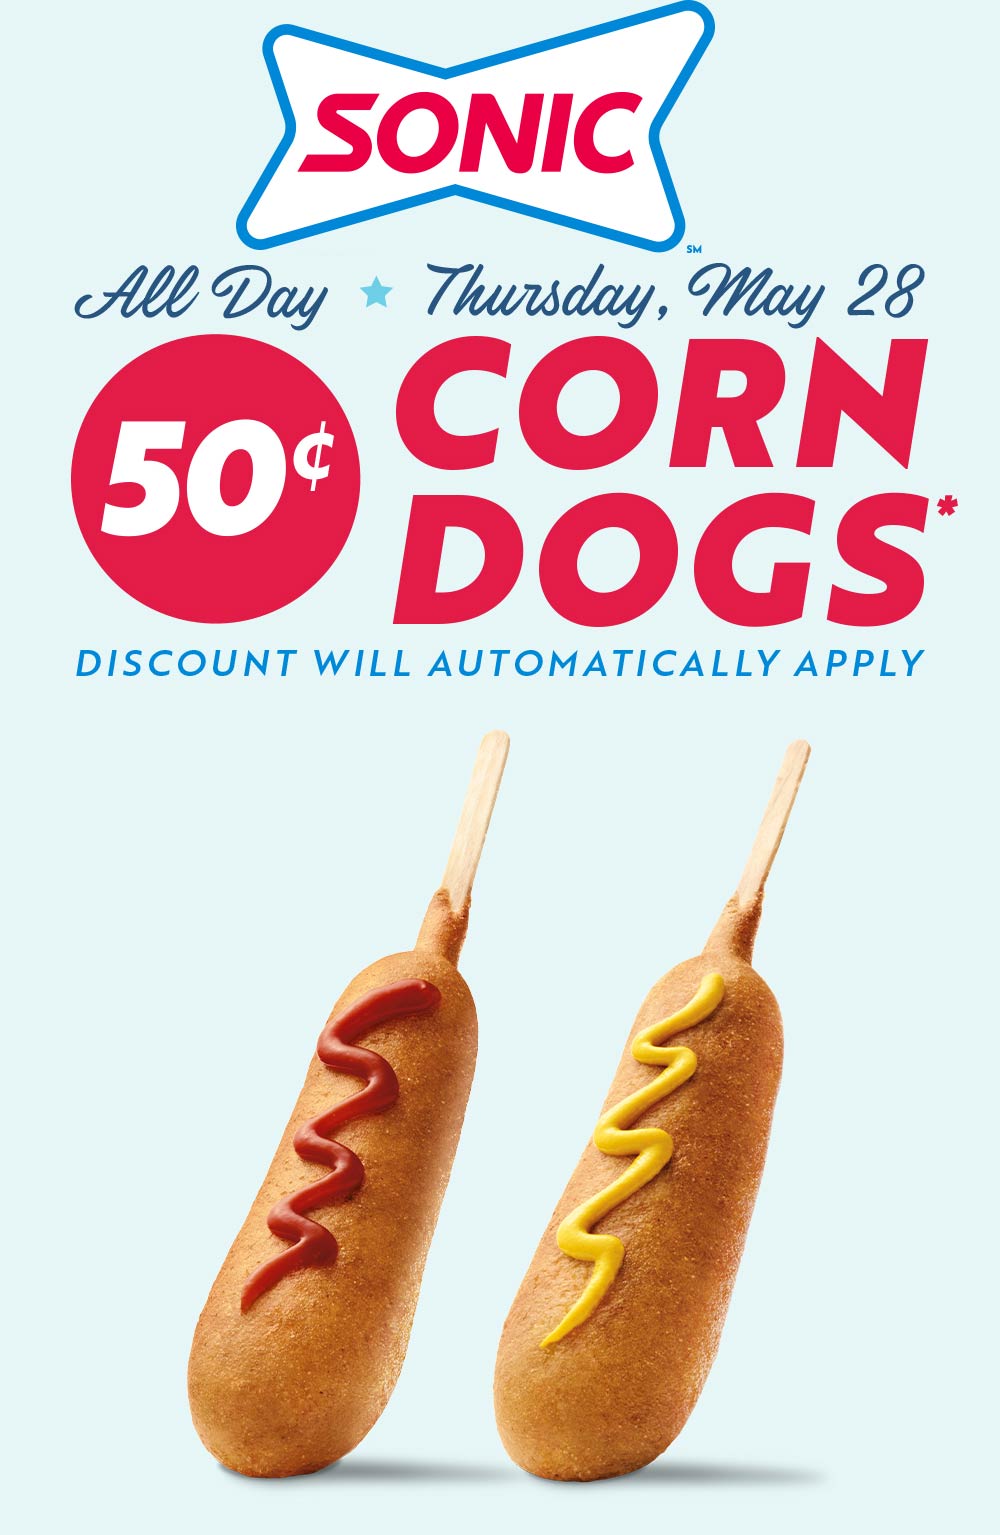 Sonic Drive-In restaurants Coupon  .50 cent corn dogs today at Sonic Drive-In restaurants #sonicdrivein